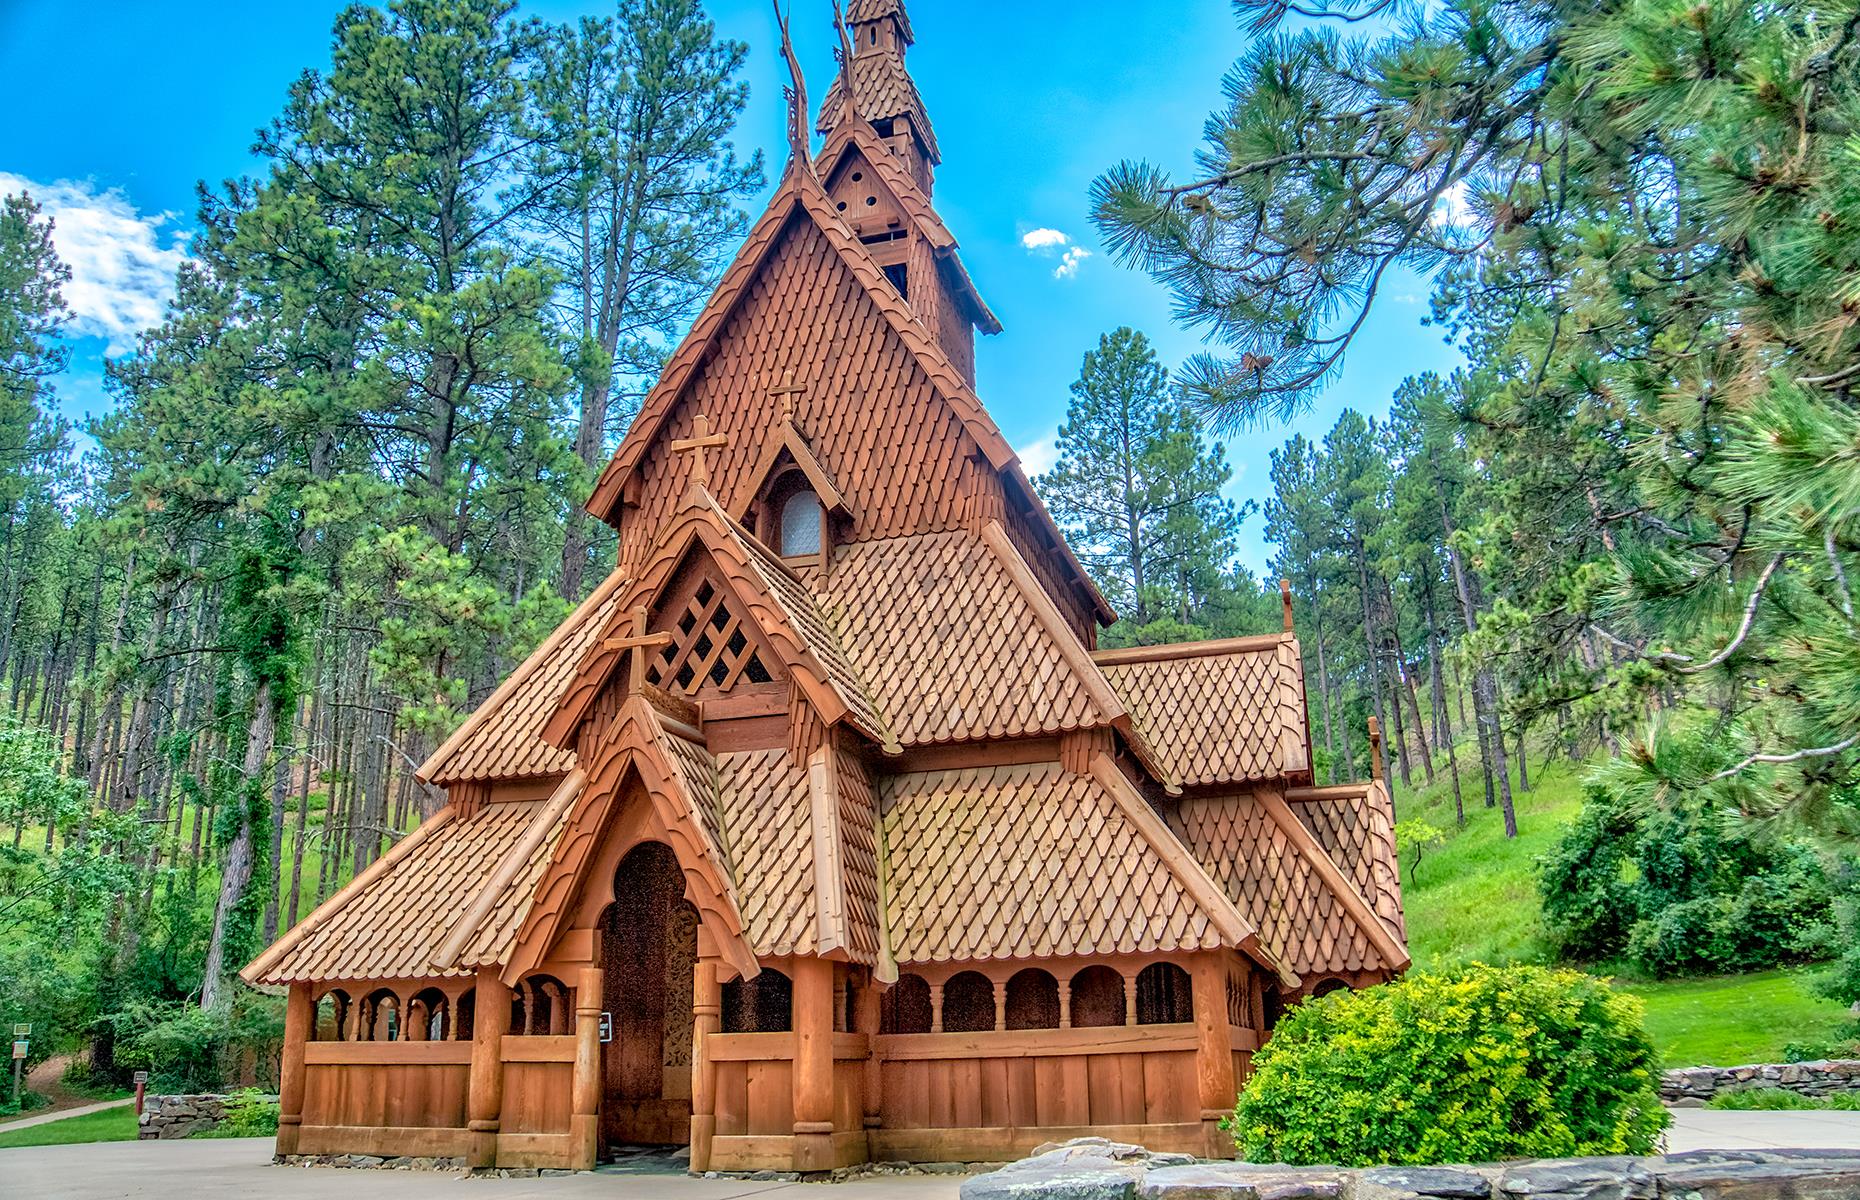 <p>A unique church, reminiscent of fantastical Arendelle in <em>Frozen</em>, this wooden structure is actually based on a traditional Norwegian stave church. The chapel was finished in 1969 and is constructed entirely out of wood, featuring intricate carvings, including a hand-crafted altar and an antique pipe organ. Visitors can not only use it as a place of worship but also learn about the history and traditions of Norwegian stave churches – which they may not expect to do in a place as far away as South Dakota.</p>